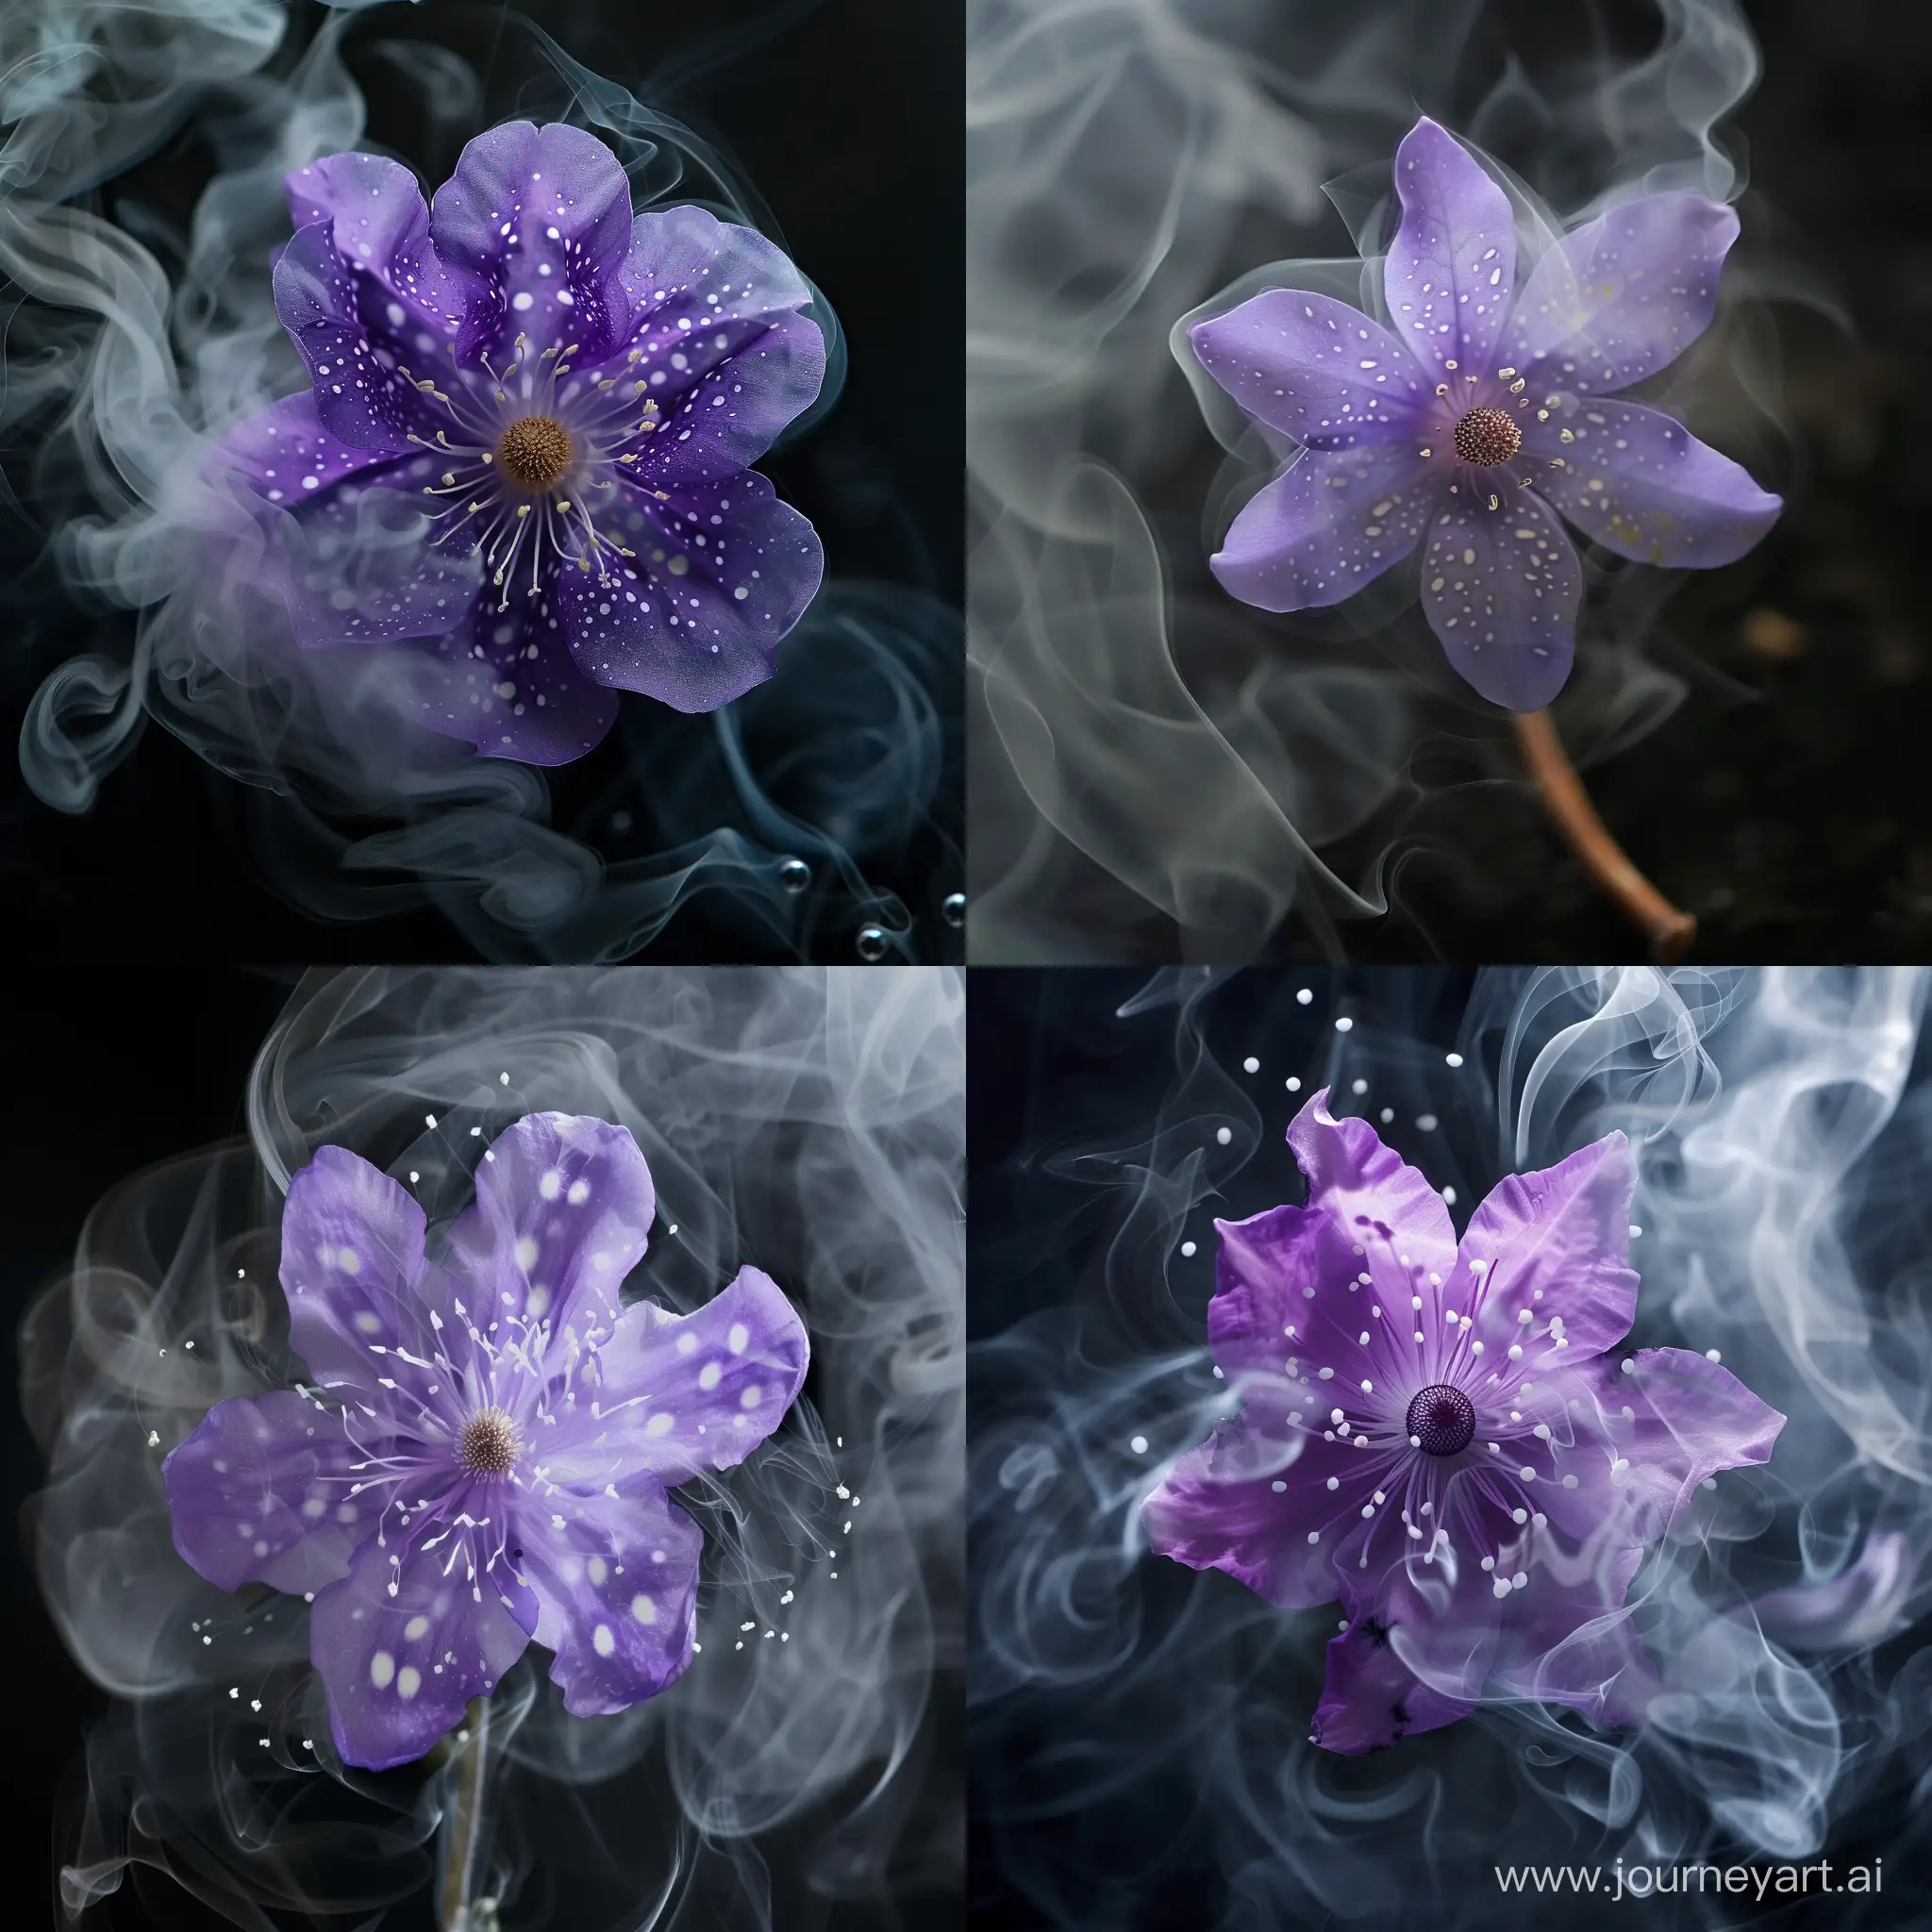 Purple-Flower-with-White-Spots-Surrounded-by-Smoke